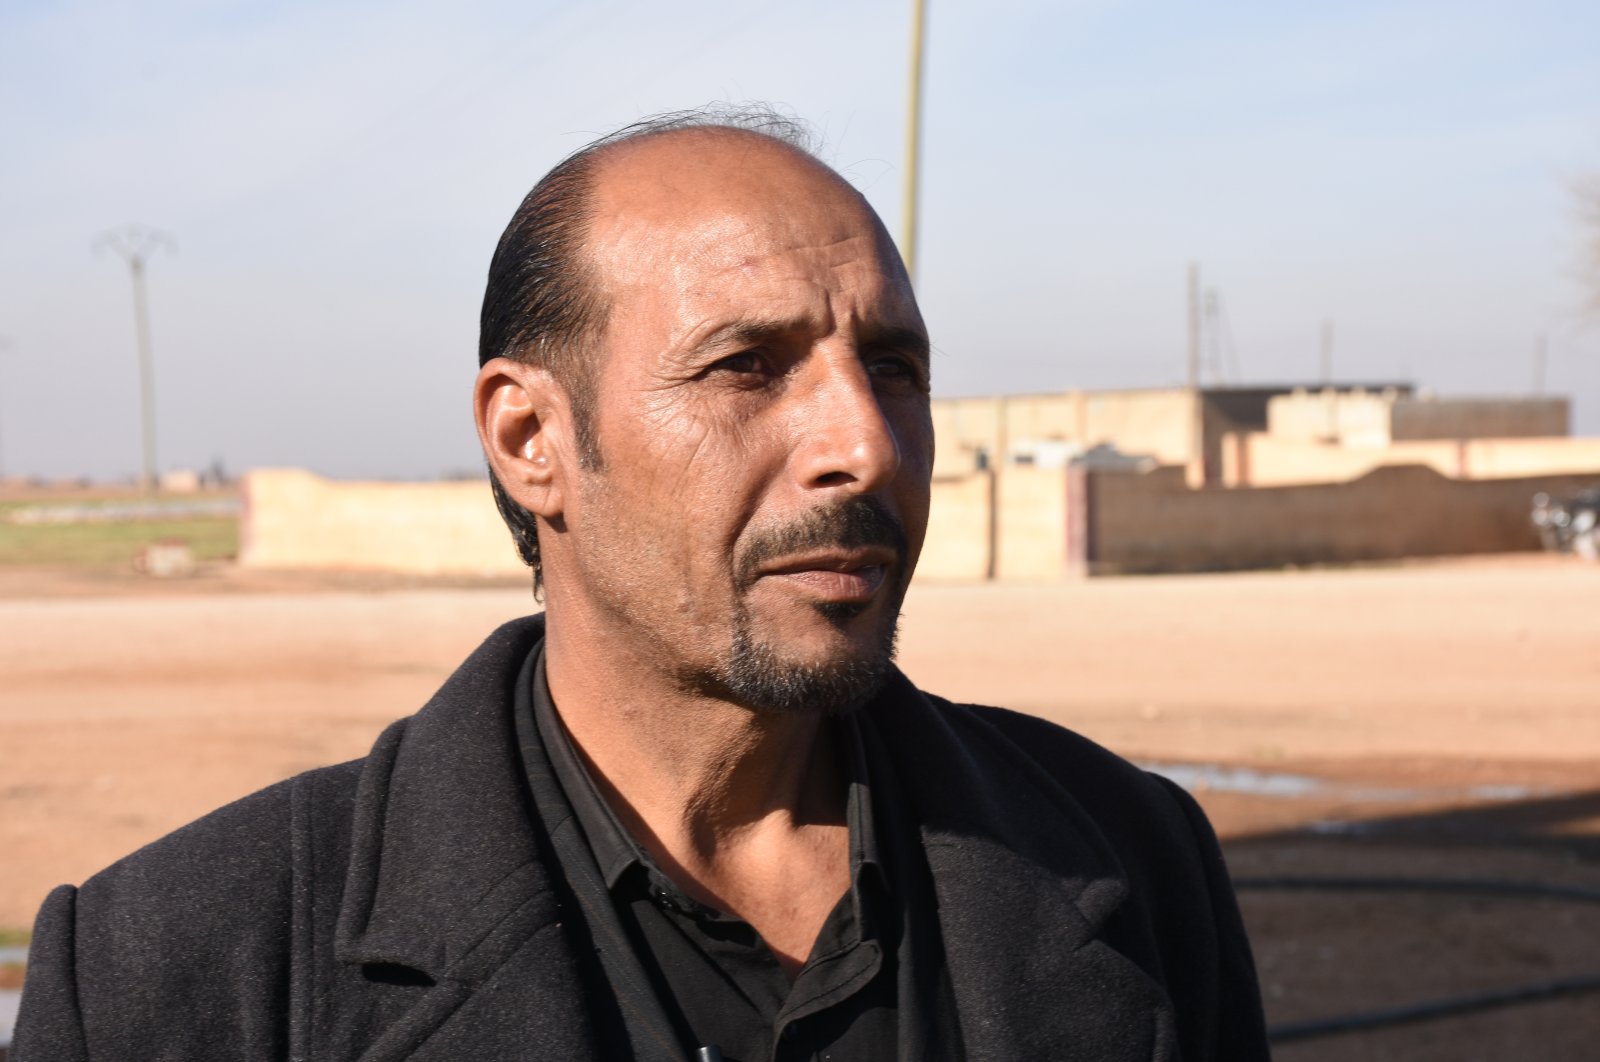 Samer Issa, the water affairs officer of Tel Abyad's local council, talks to Anadolu Agency (AA) in an interview, Tel Abyad, northern Syria, Dec. 29, 2020. (AA Photo)